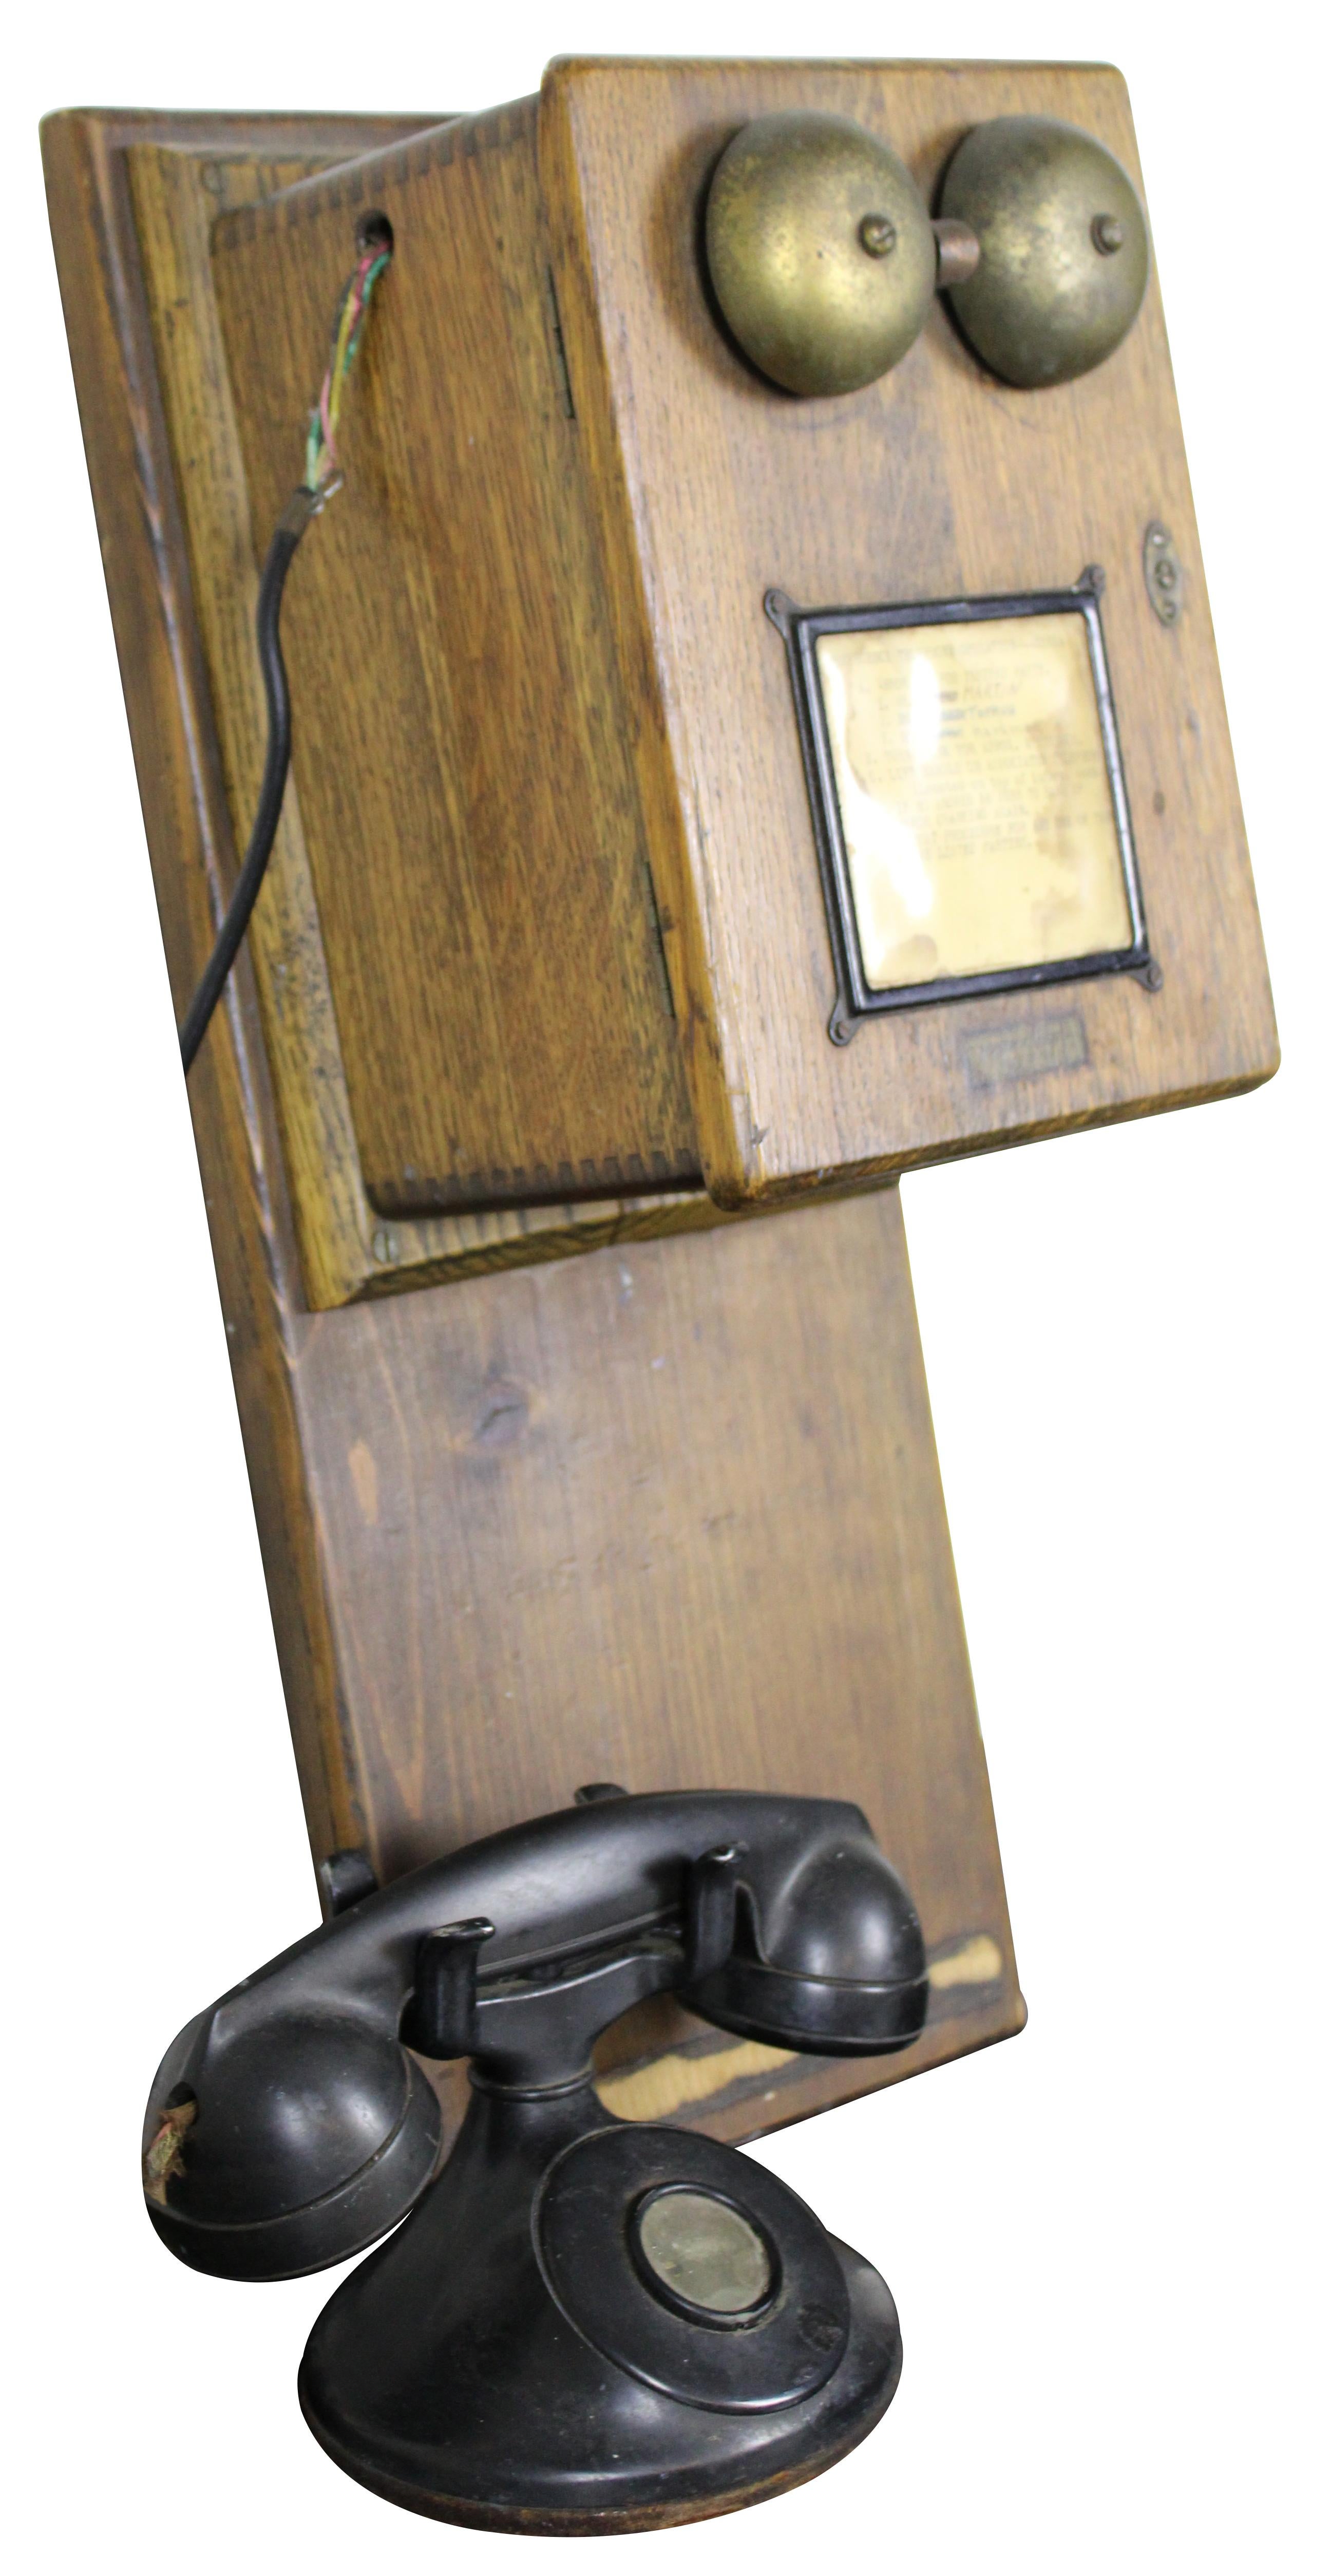 Antique early 1900s Western Electric / bell systems oak wall mounted hand crank telephone ringer box with black bakelite tabletop handset.

Main Section - 9” x 6.75” x 21” / Handset - 8.75” x 5” x 5.75” (Width x Depth x Height).